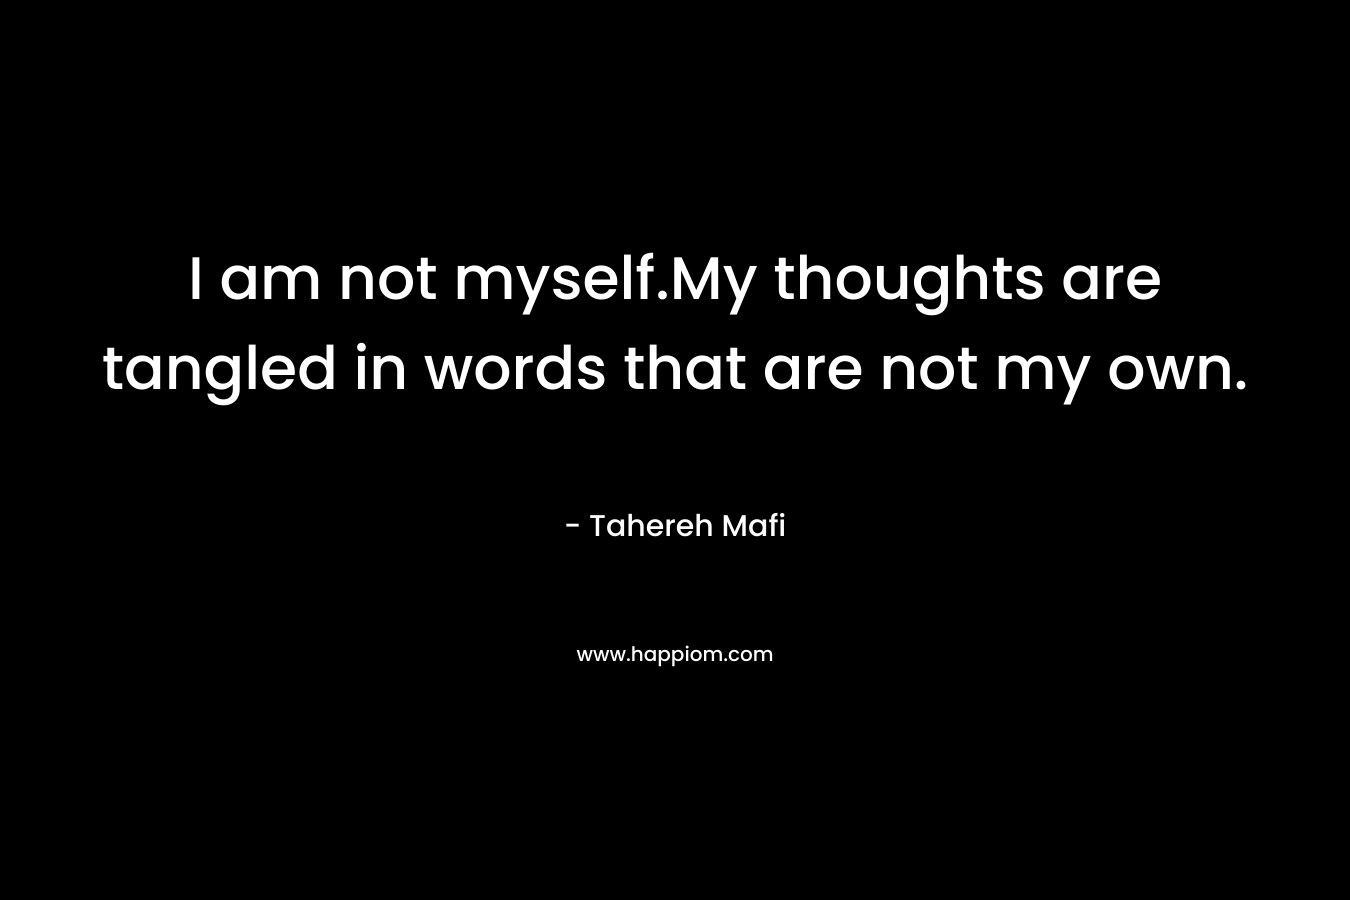 I am not myself.My thoughts are tangled in words that are not my own. – Tahereh Mafi